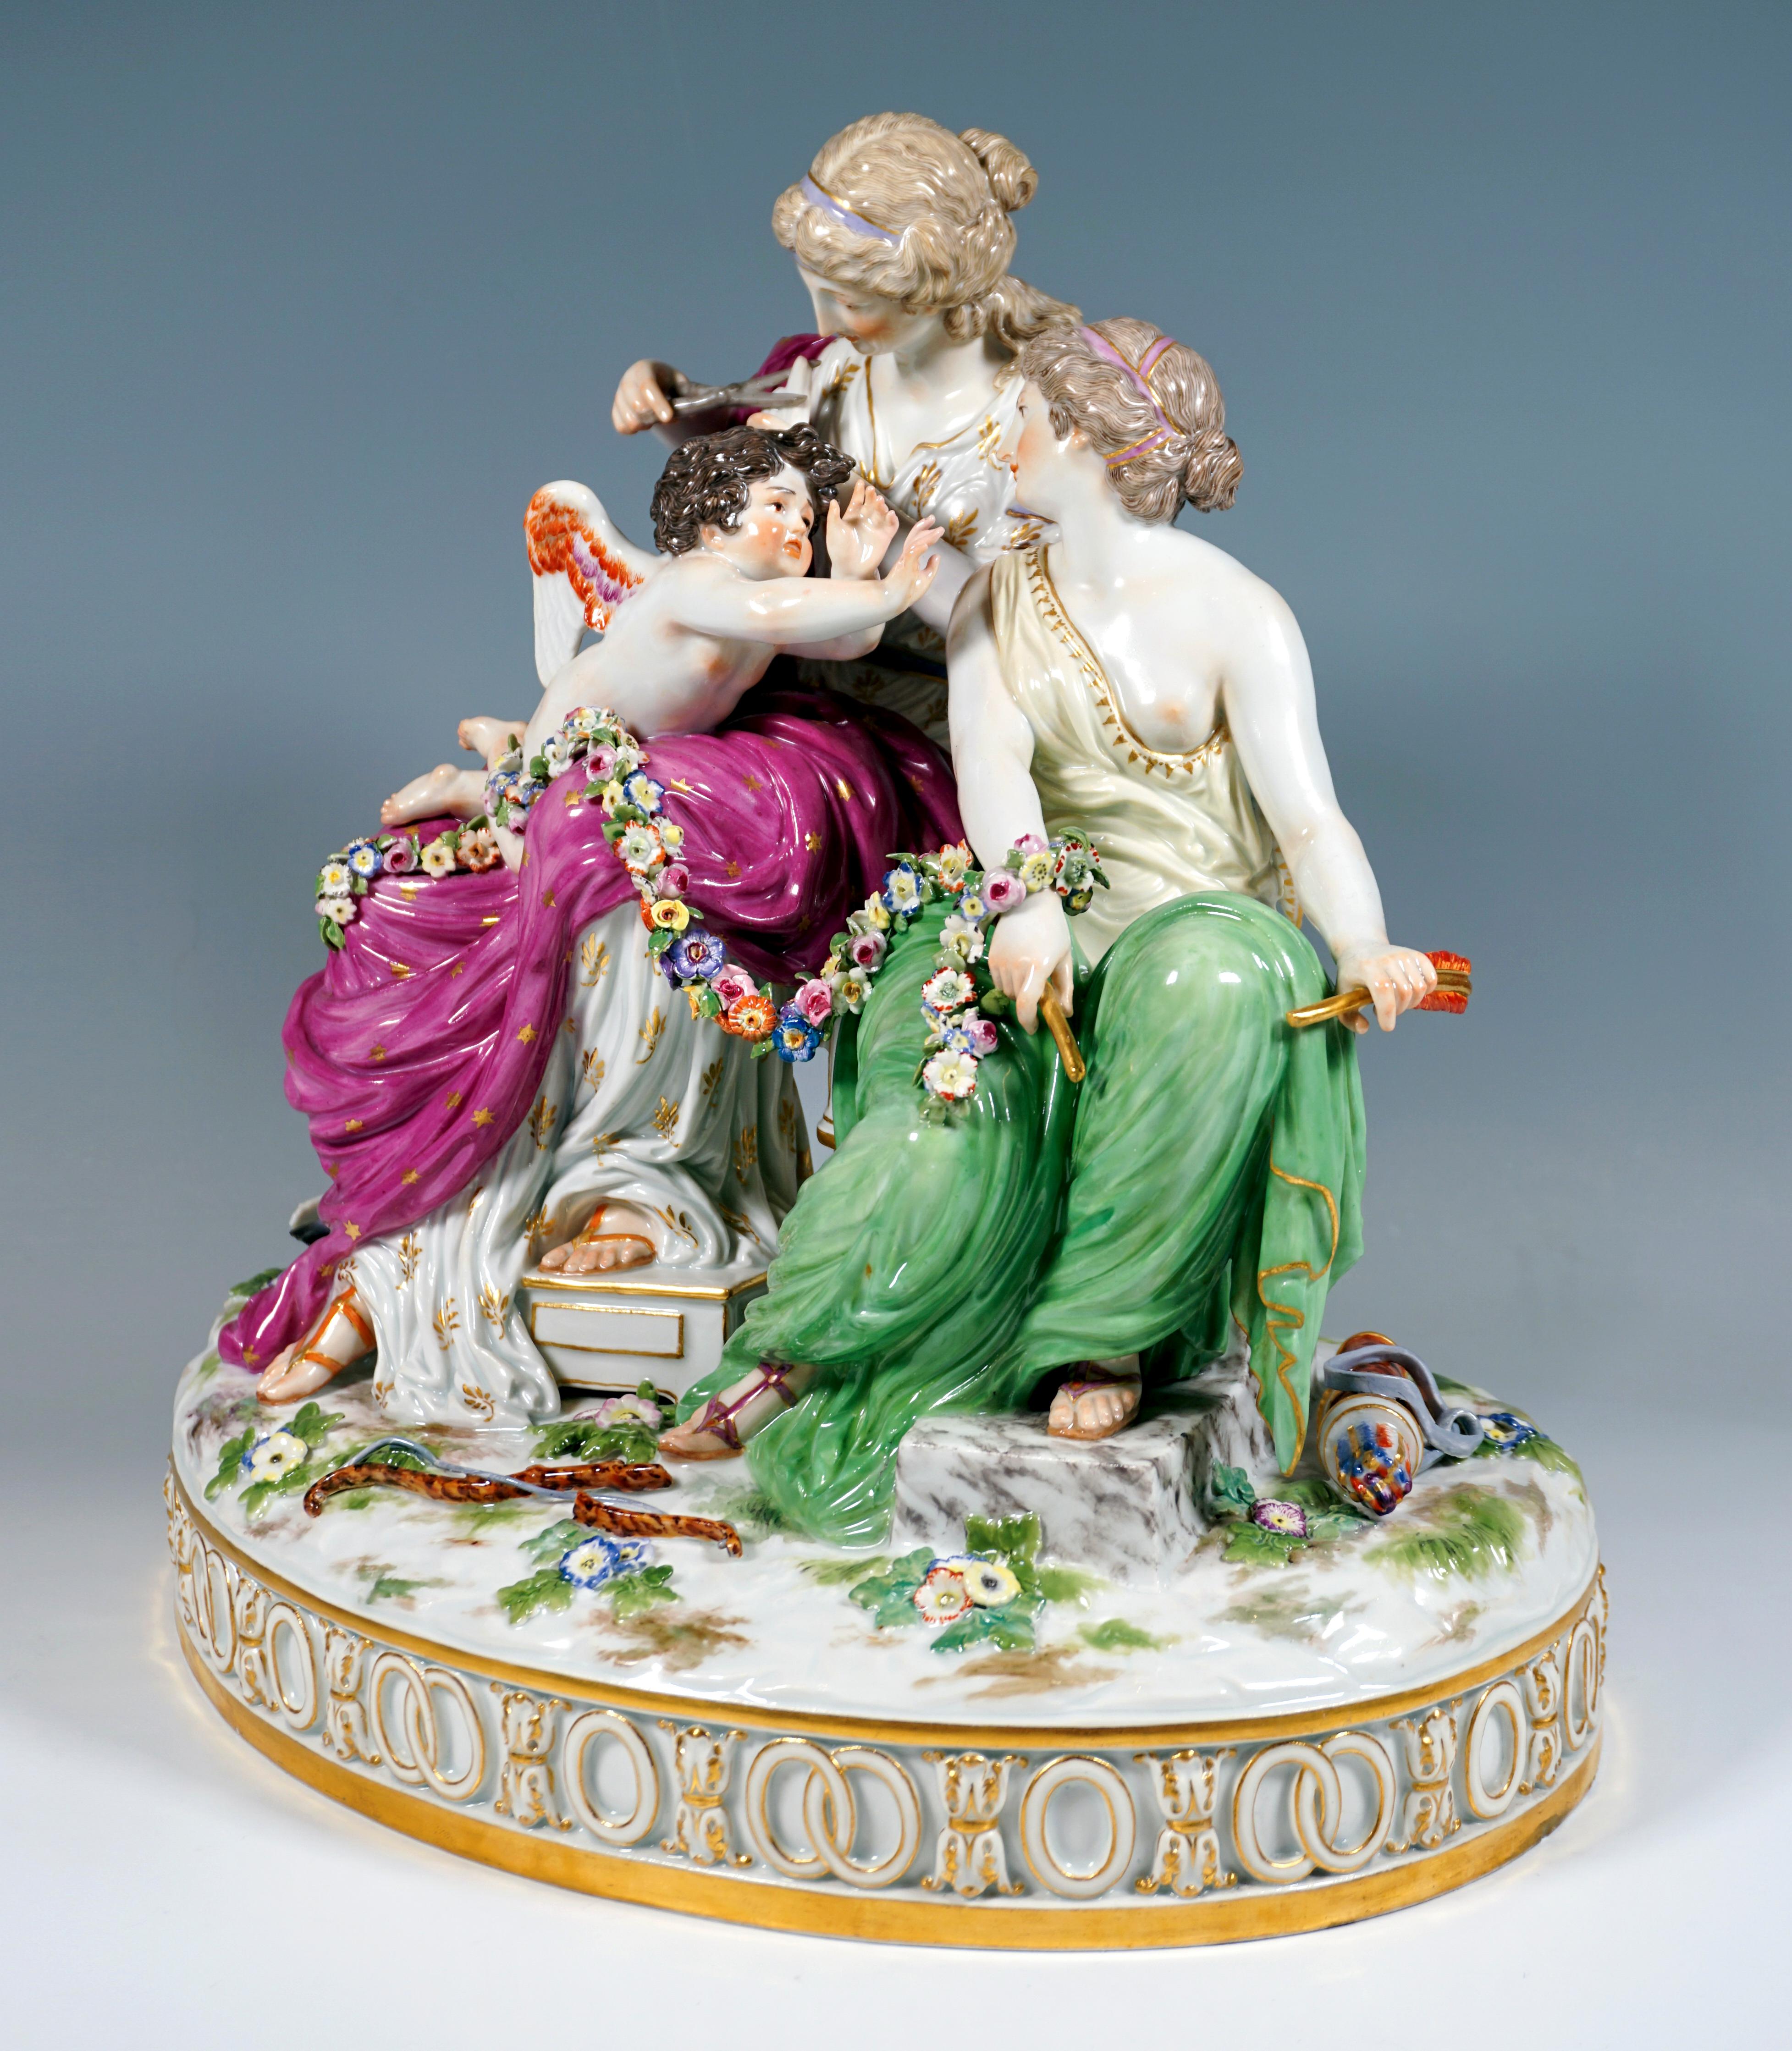 Very delicate Meissen porcelain group of the 19th century:
The Roman goddess of love, Venus, is sitting on a bench and clipping the wings of Cupid, who is lying on his stomach on her lap. The latter desperately resists the measure and turns to